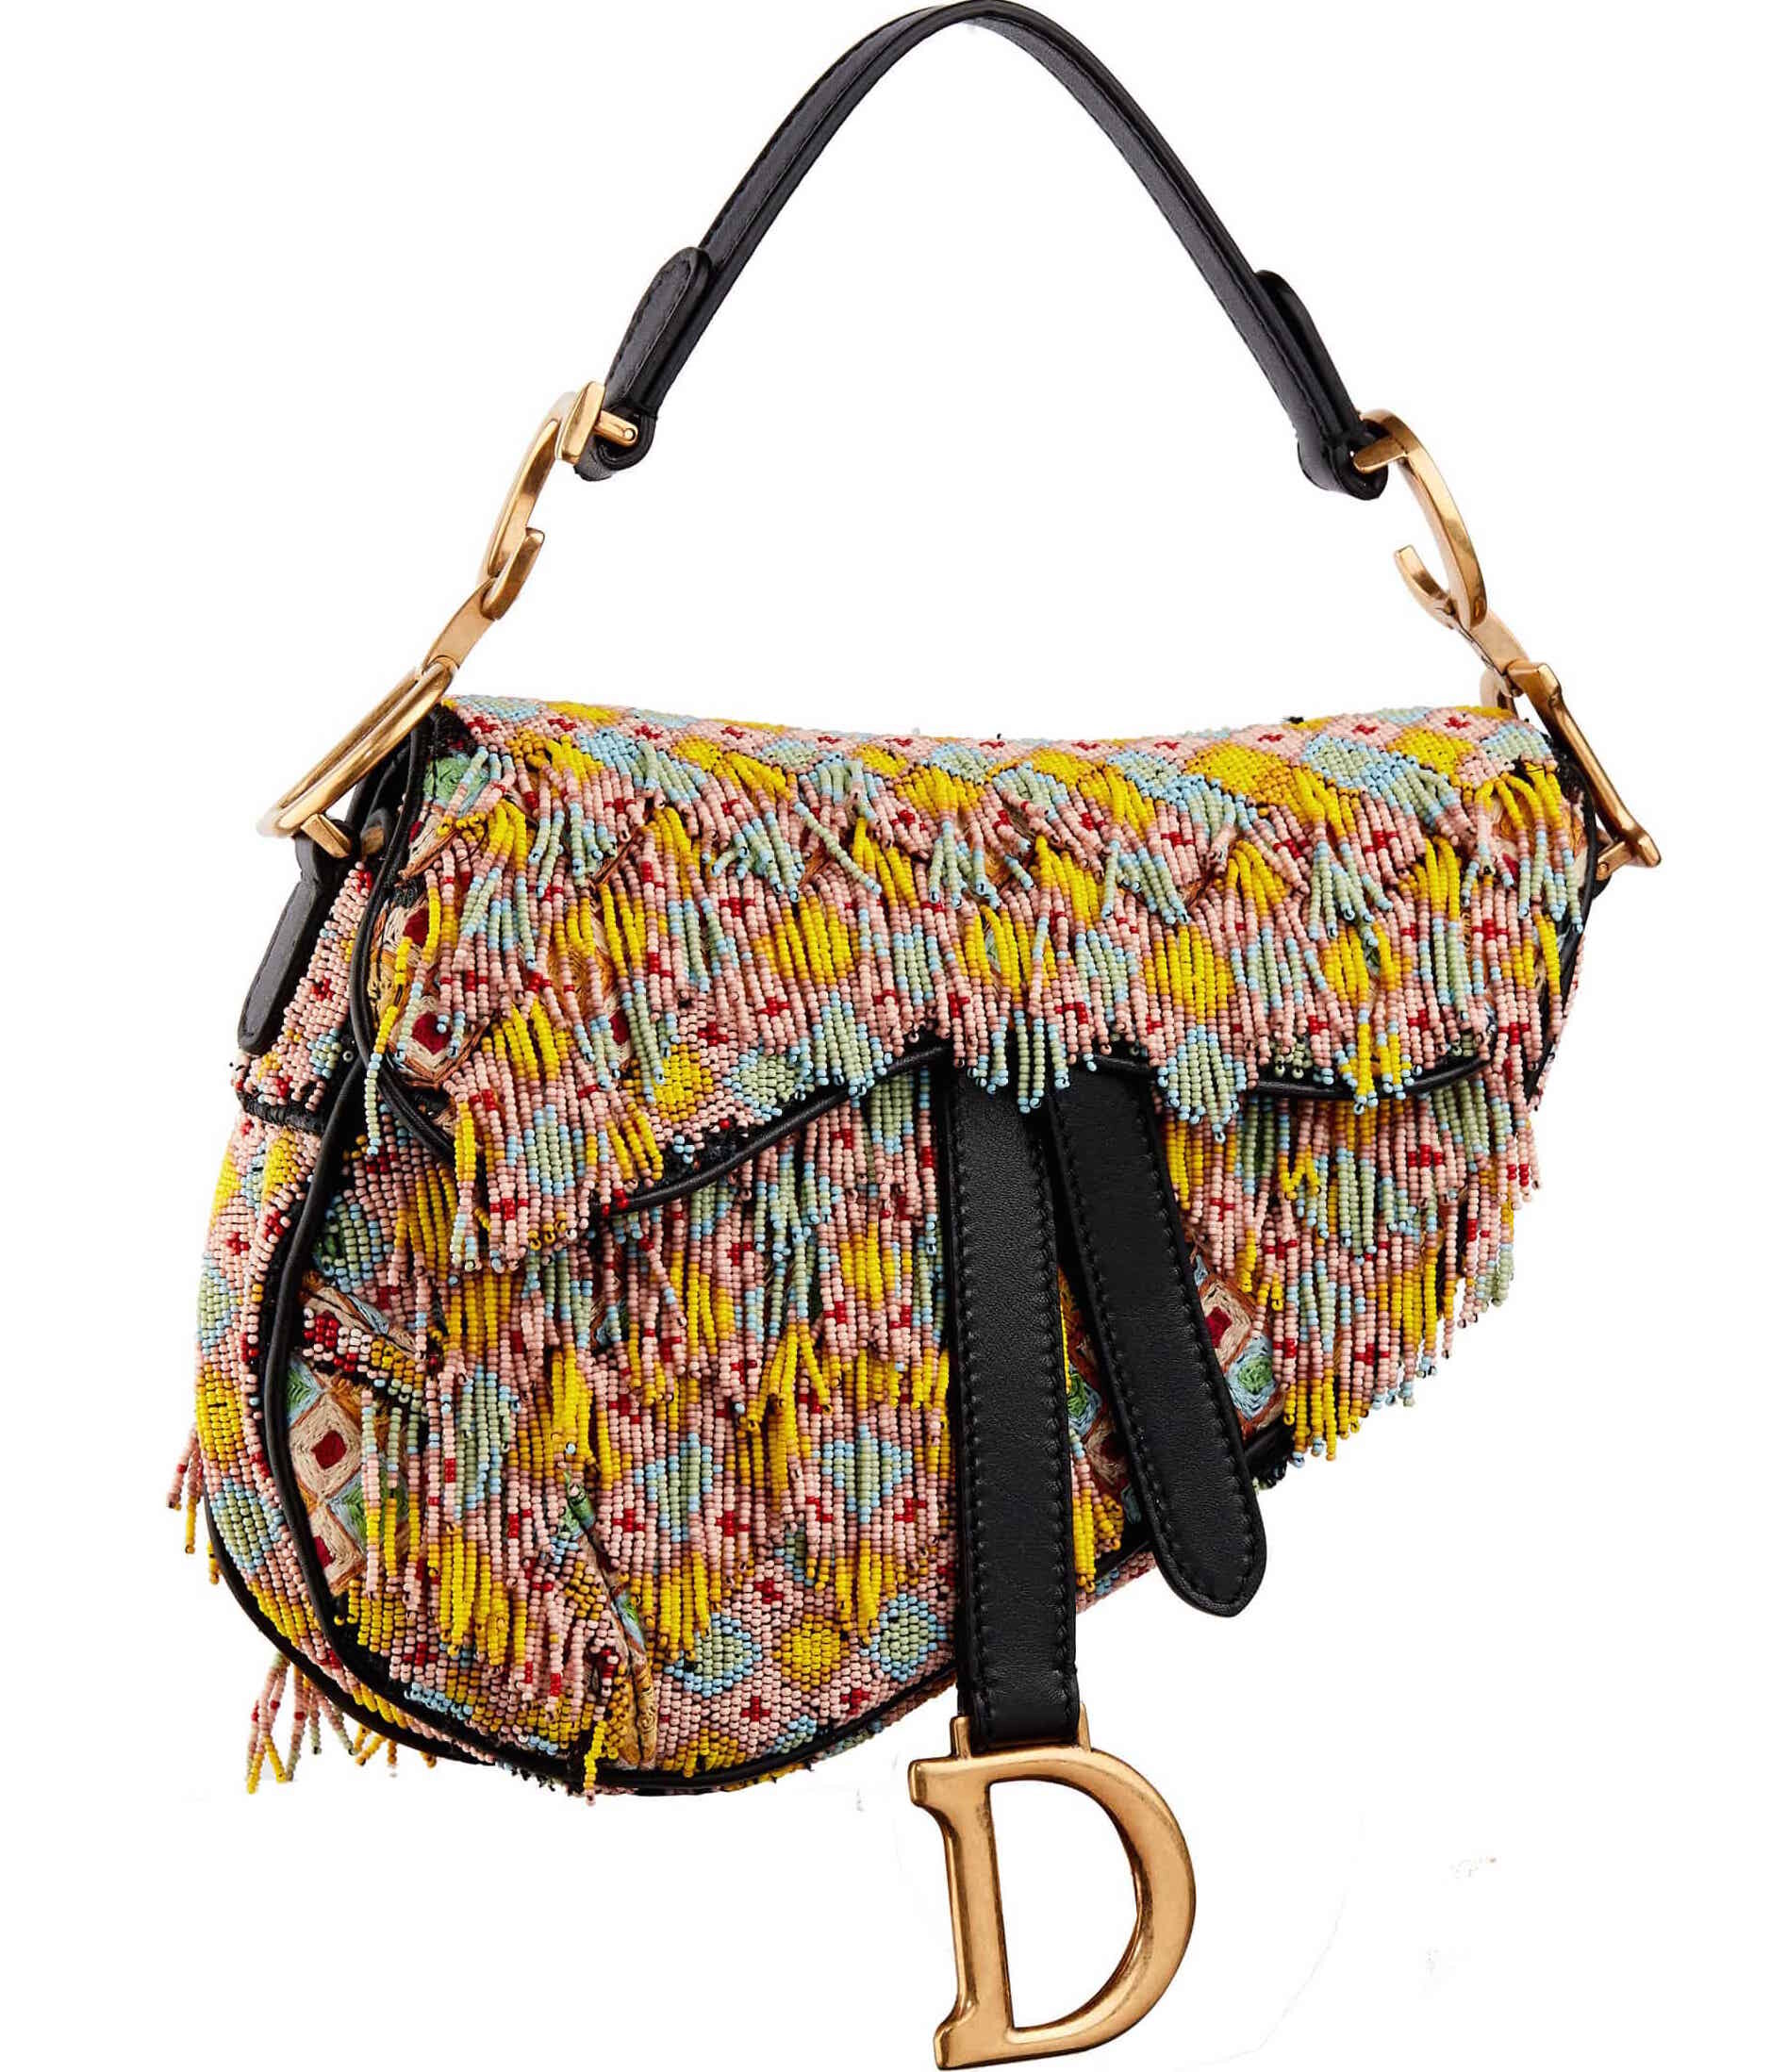 Christian Dior Mini Saddle Bag in Fringed Embroidered Canvas.jpg